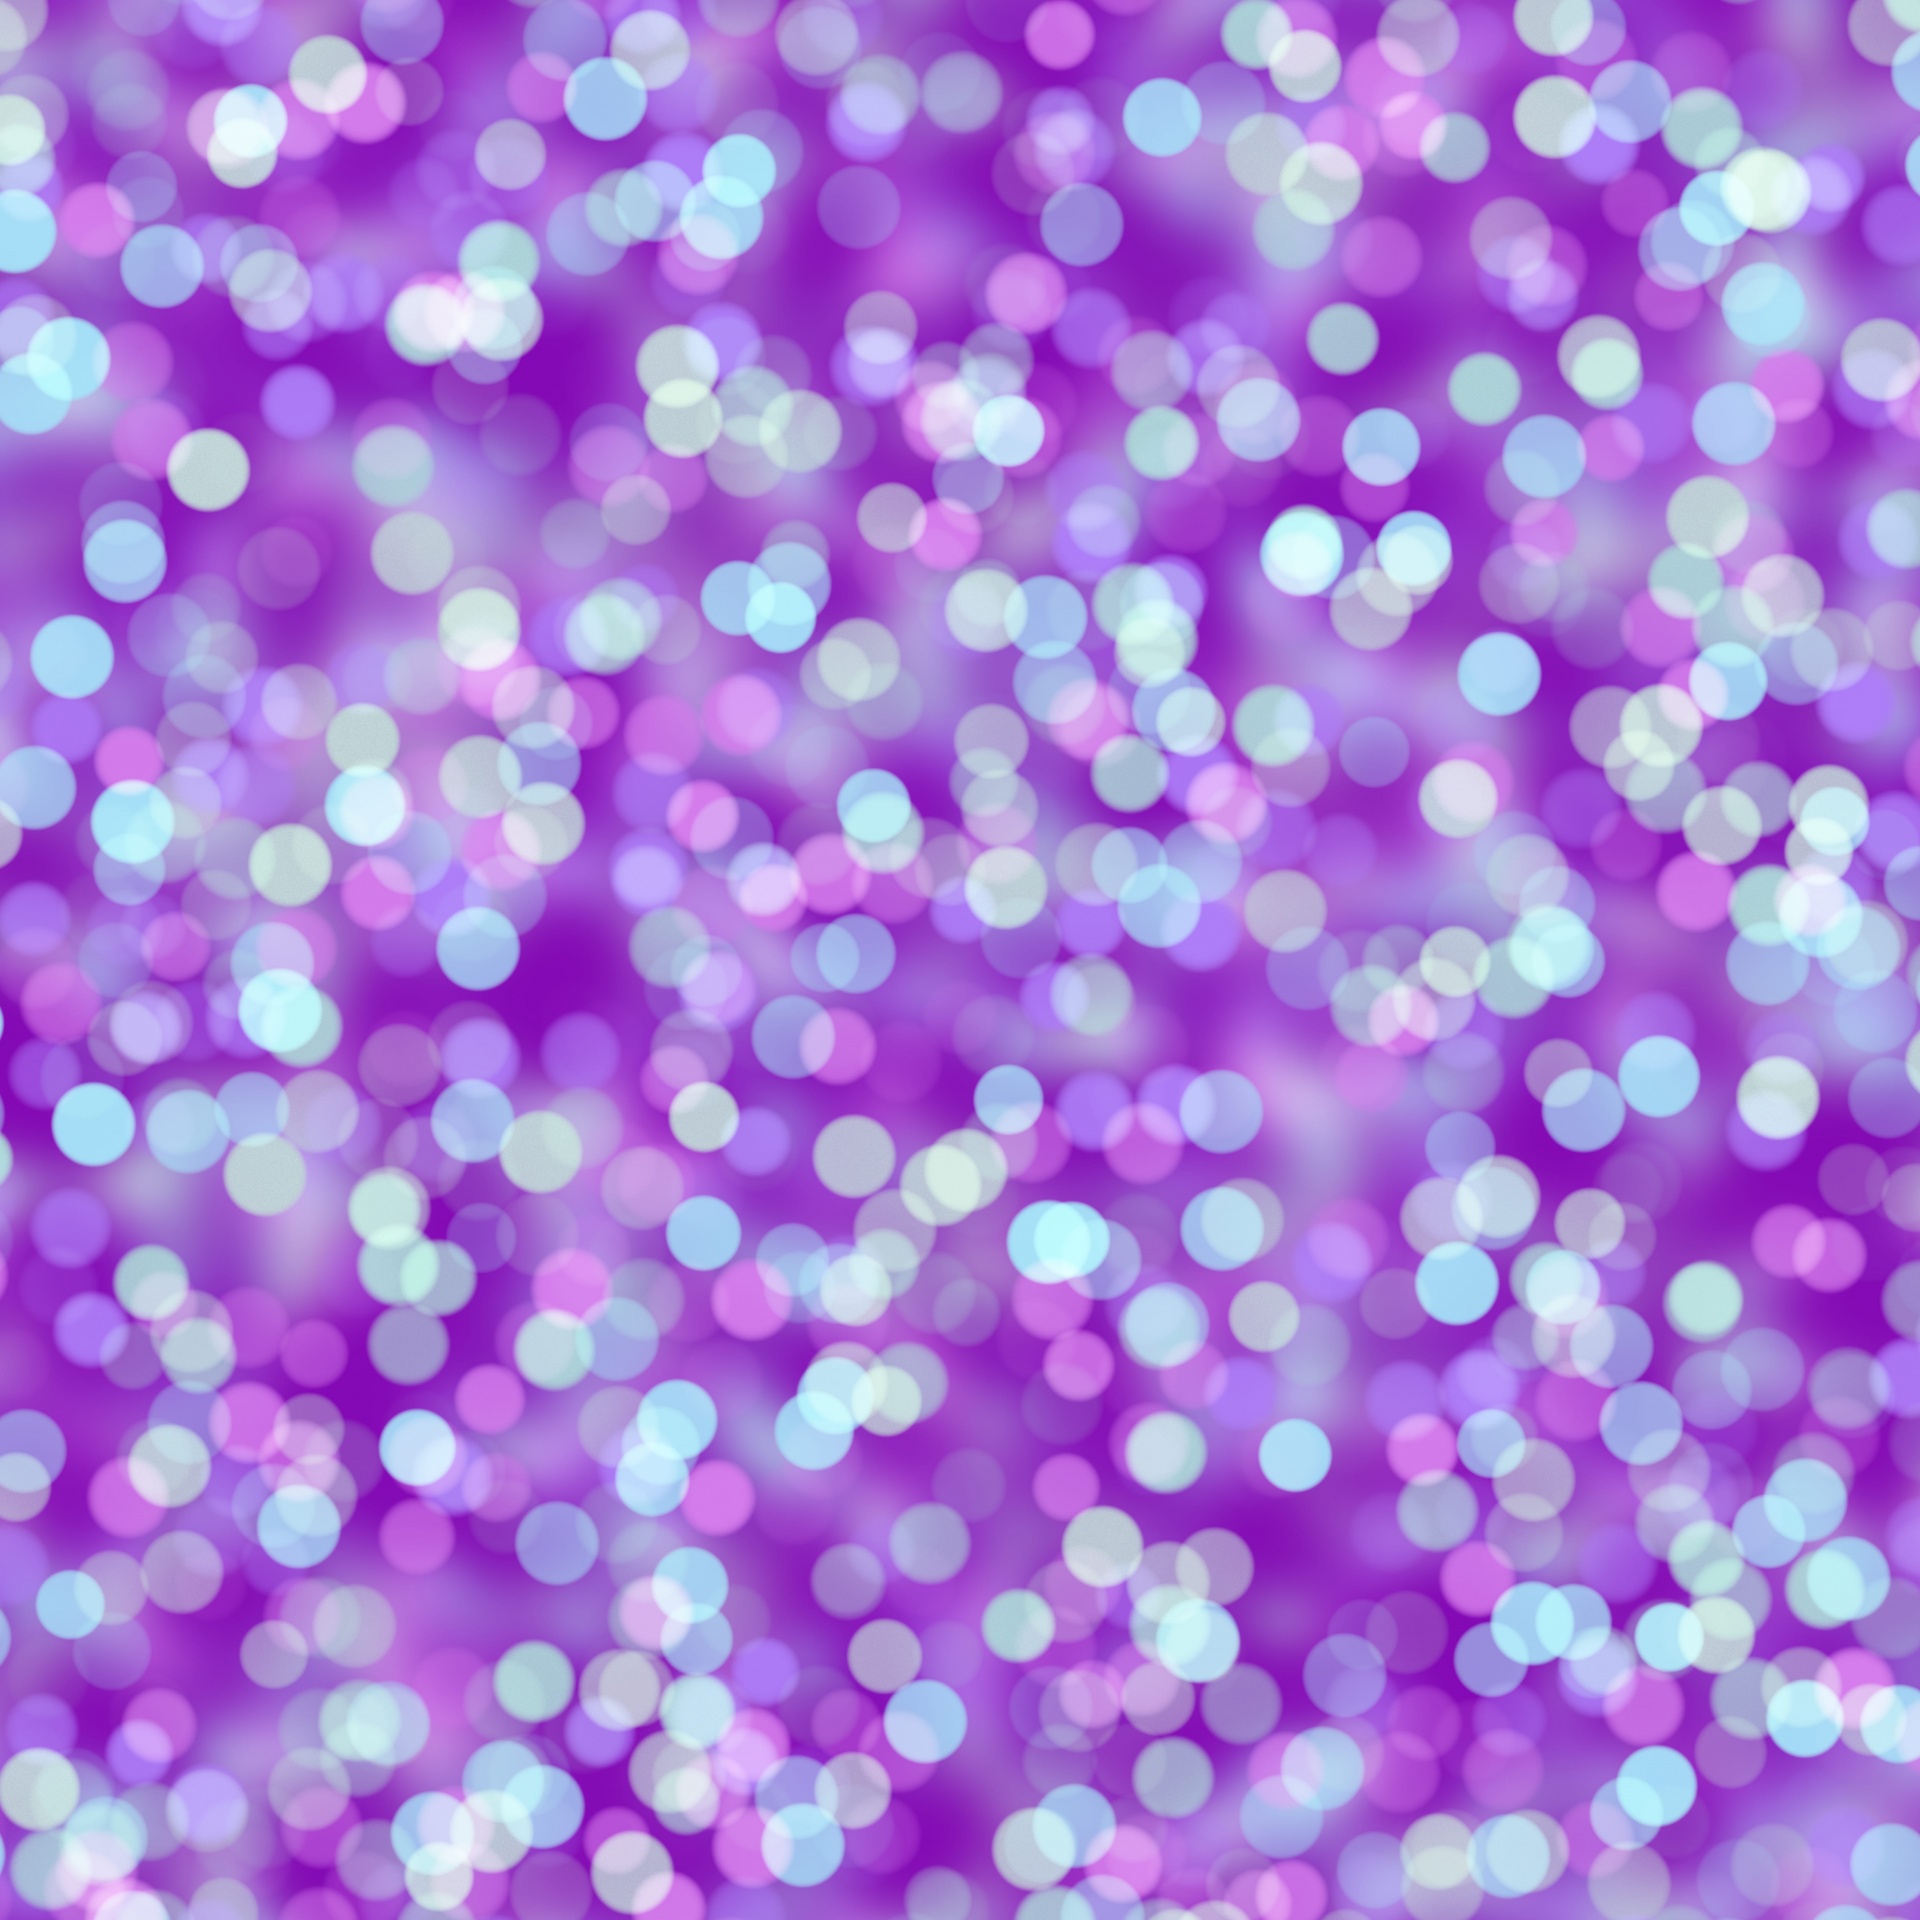 Bokeh Background Lights Abstract